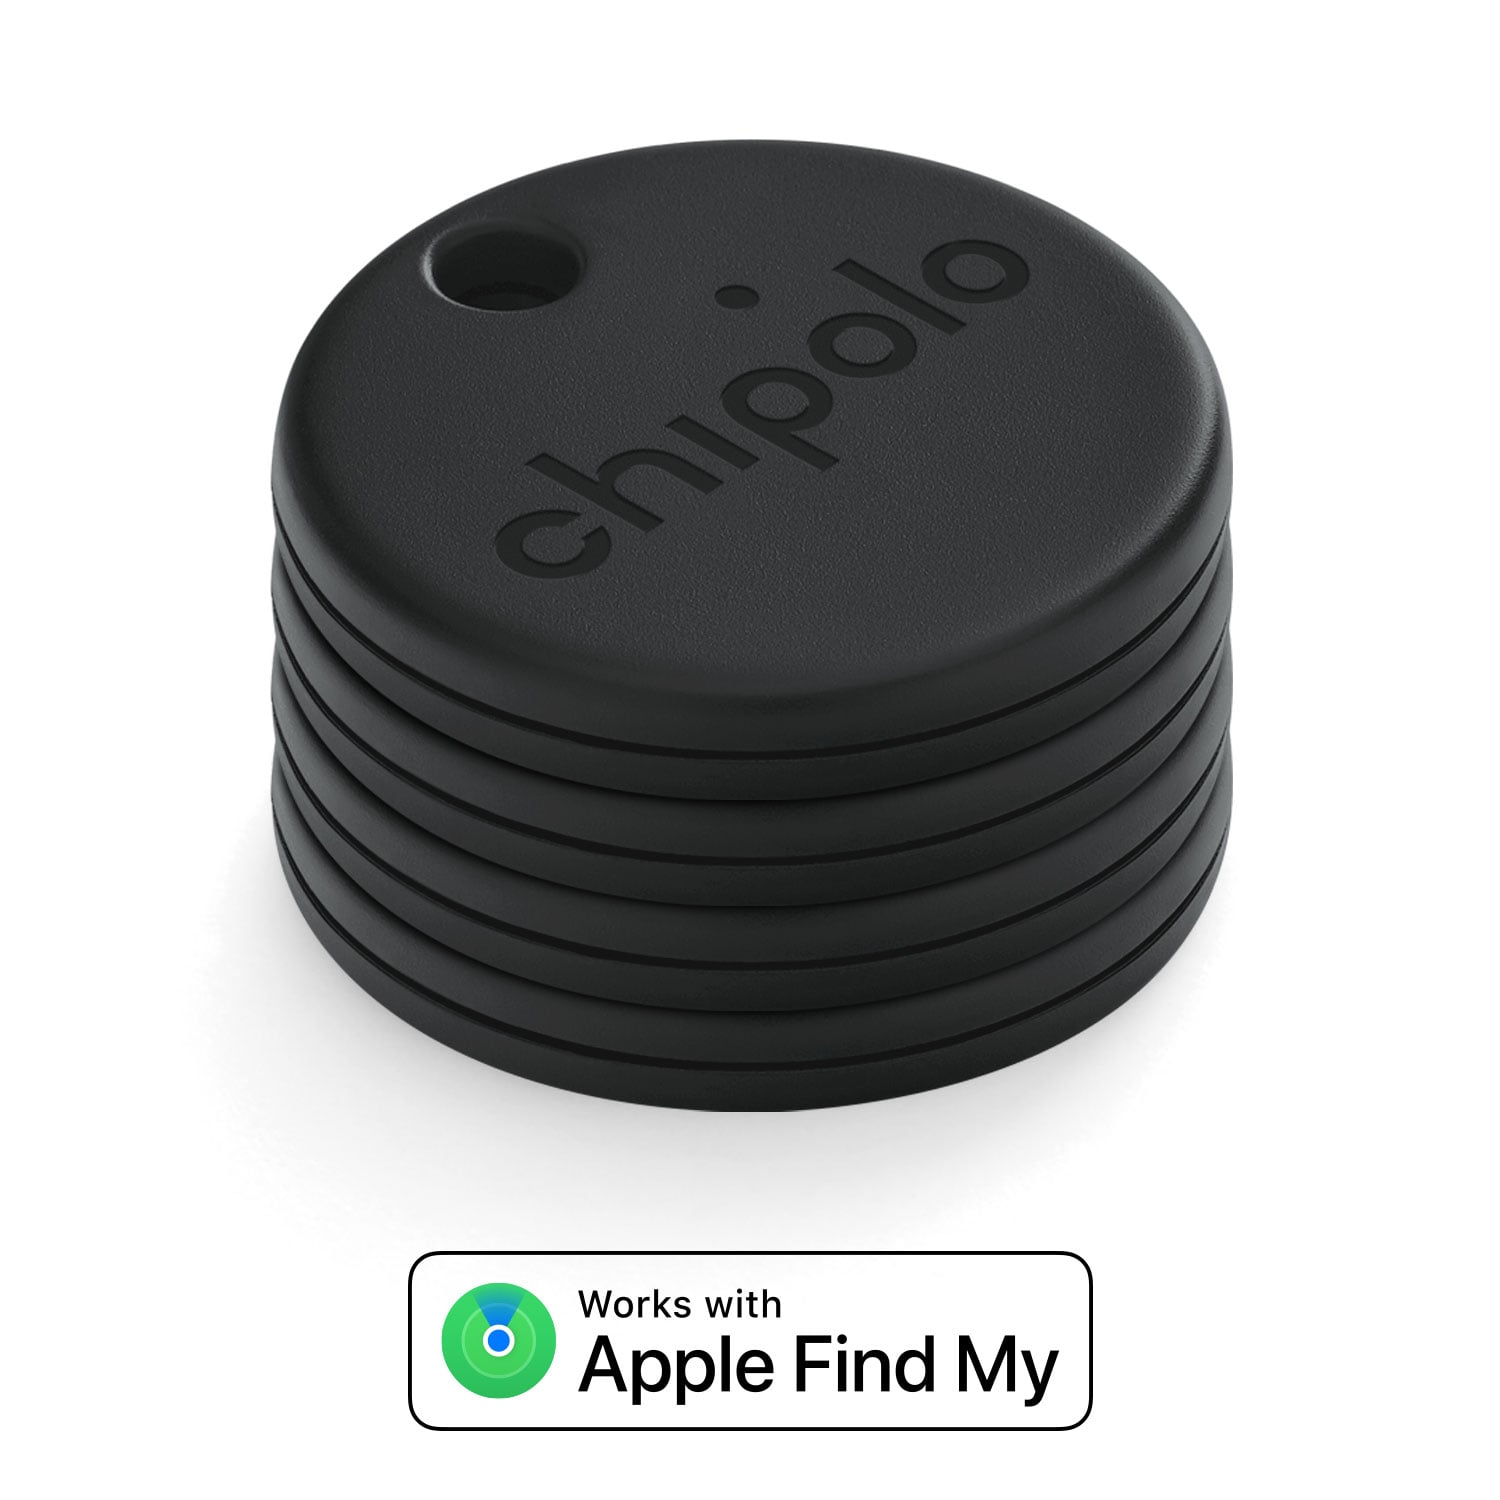 Apple AirTag vs Chipolo One Spot: Which tracker is best? - Gearbrain